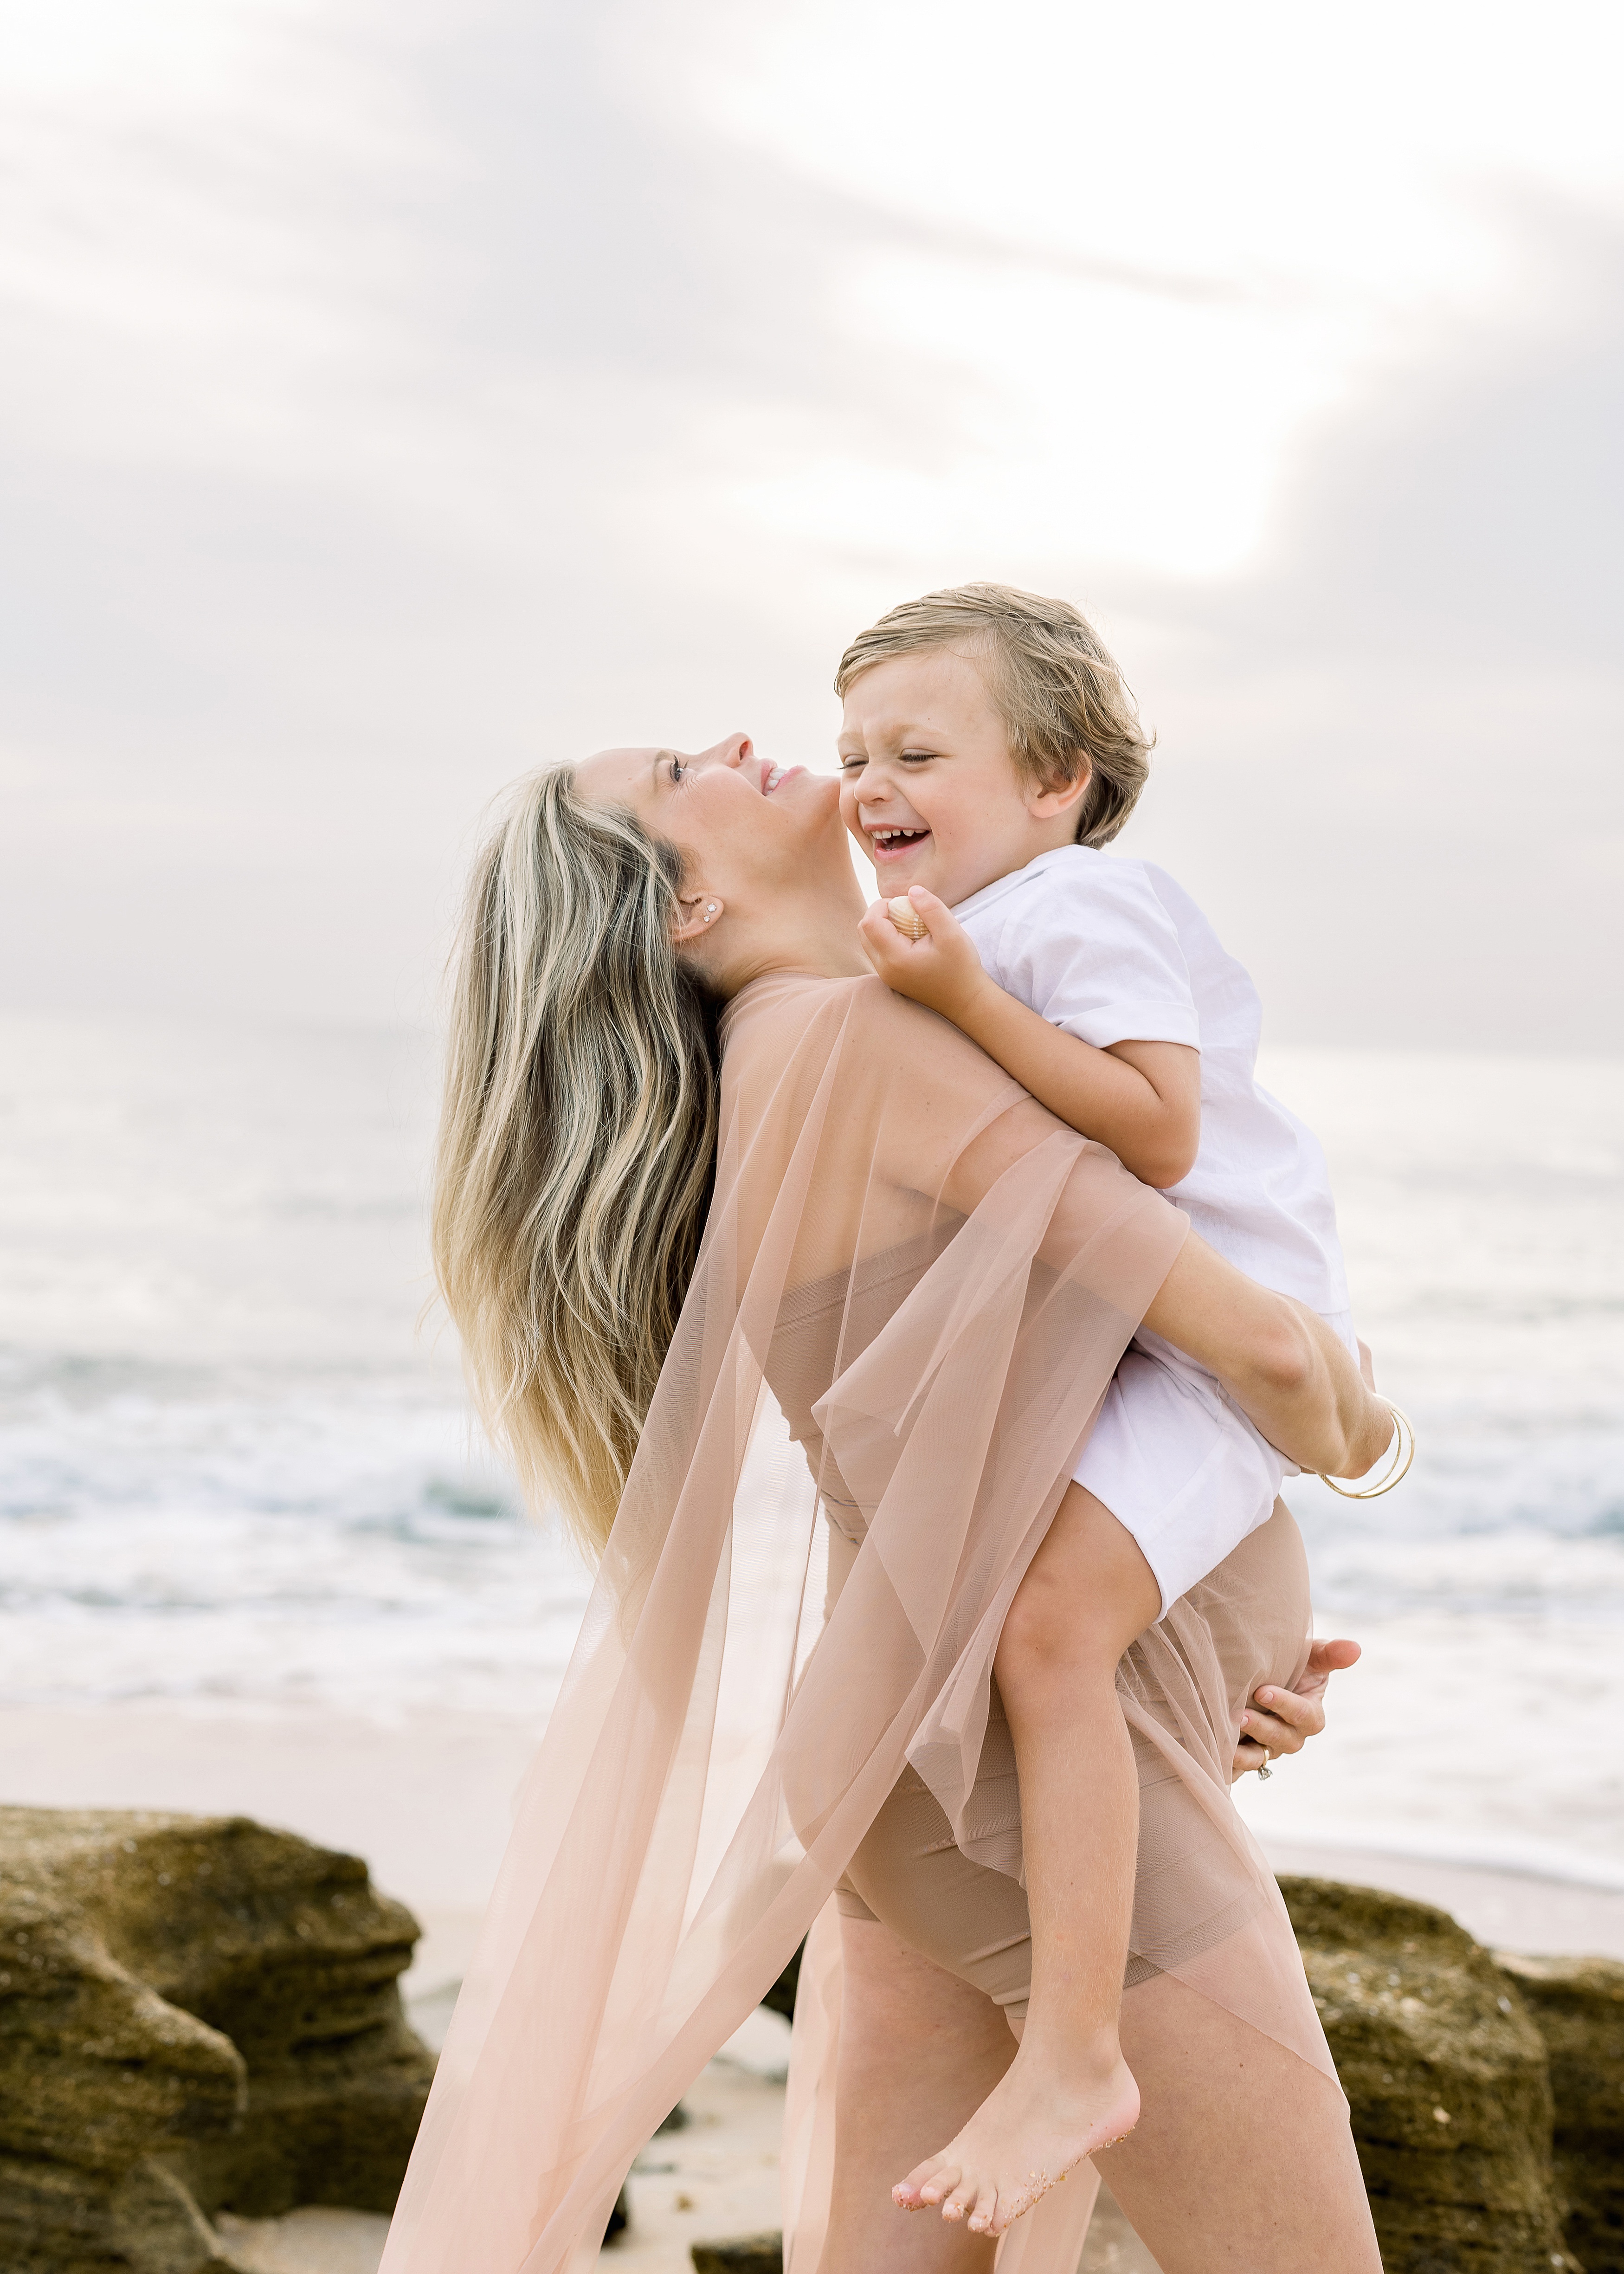 blond pregnant woman holding little boy dressed in white on the beach